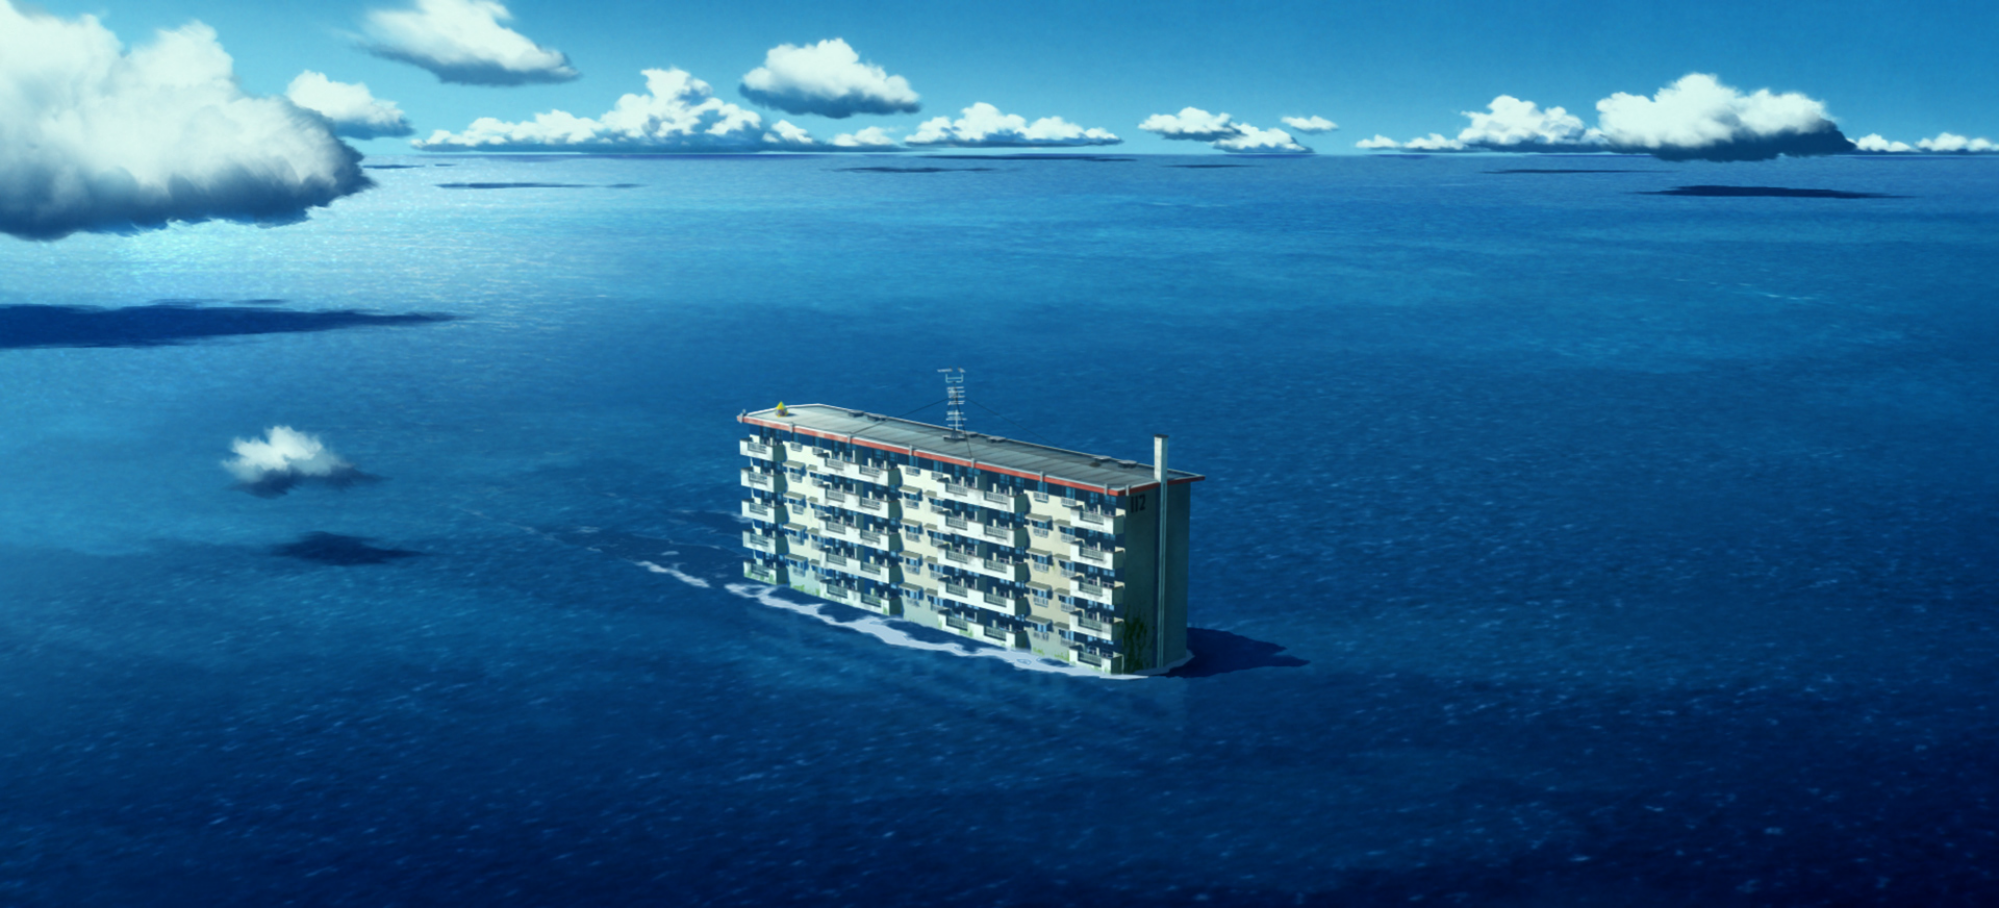 An apartment building floating in the middle of the ocean.